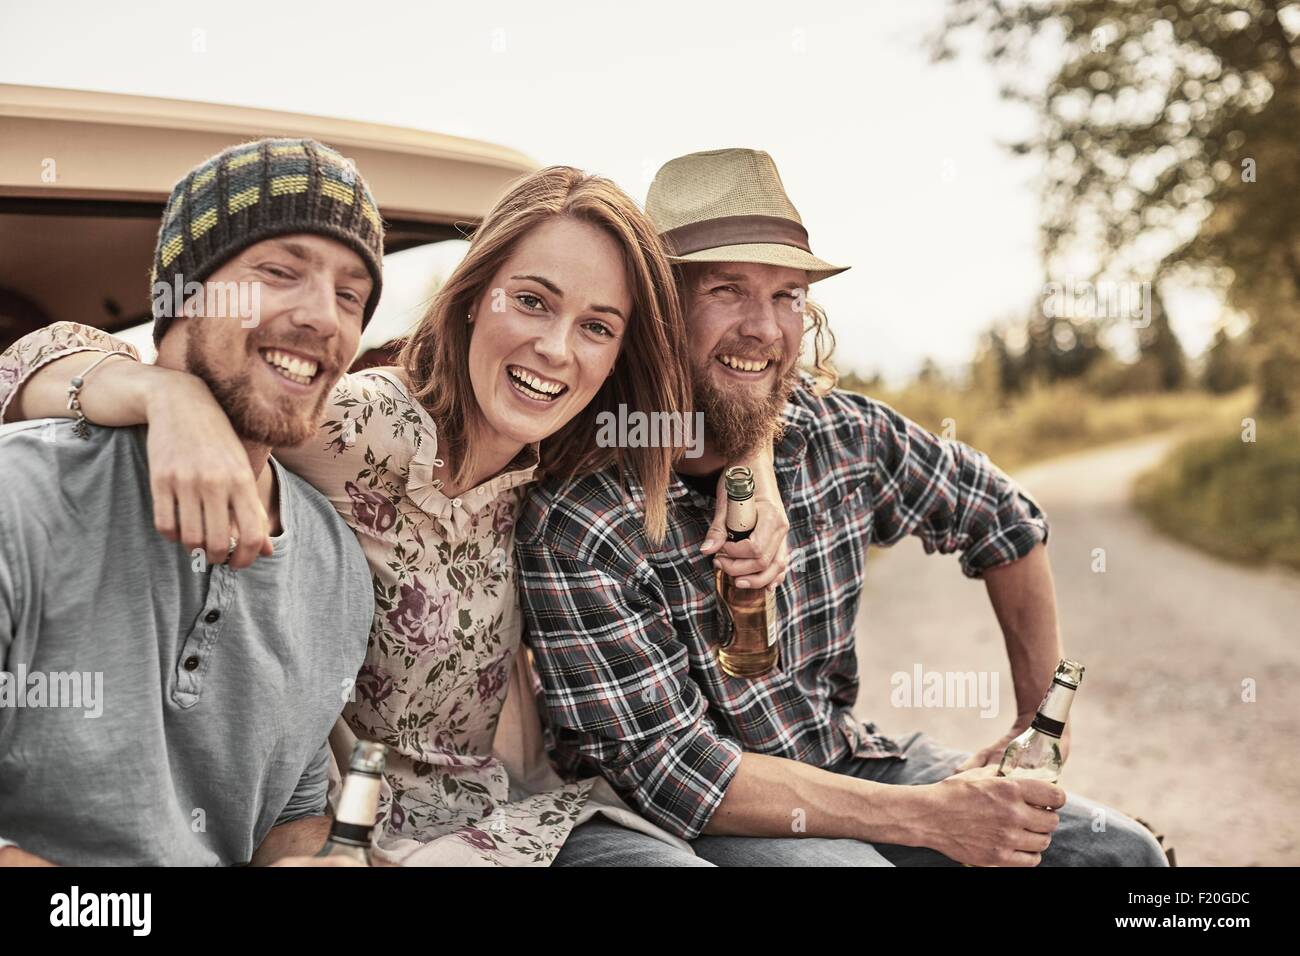 Three people holding beer bottles, looking at camera, smiling Stock Photo